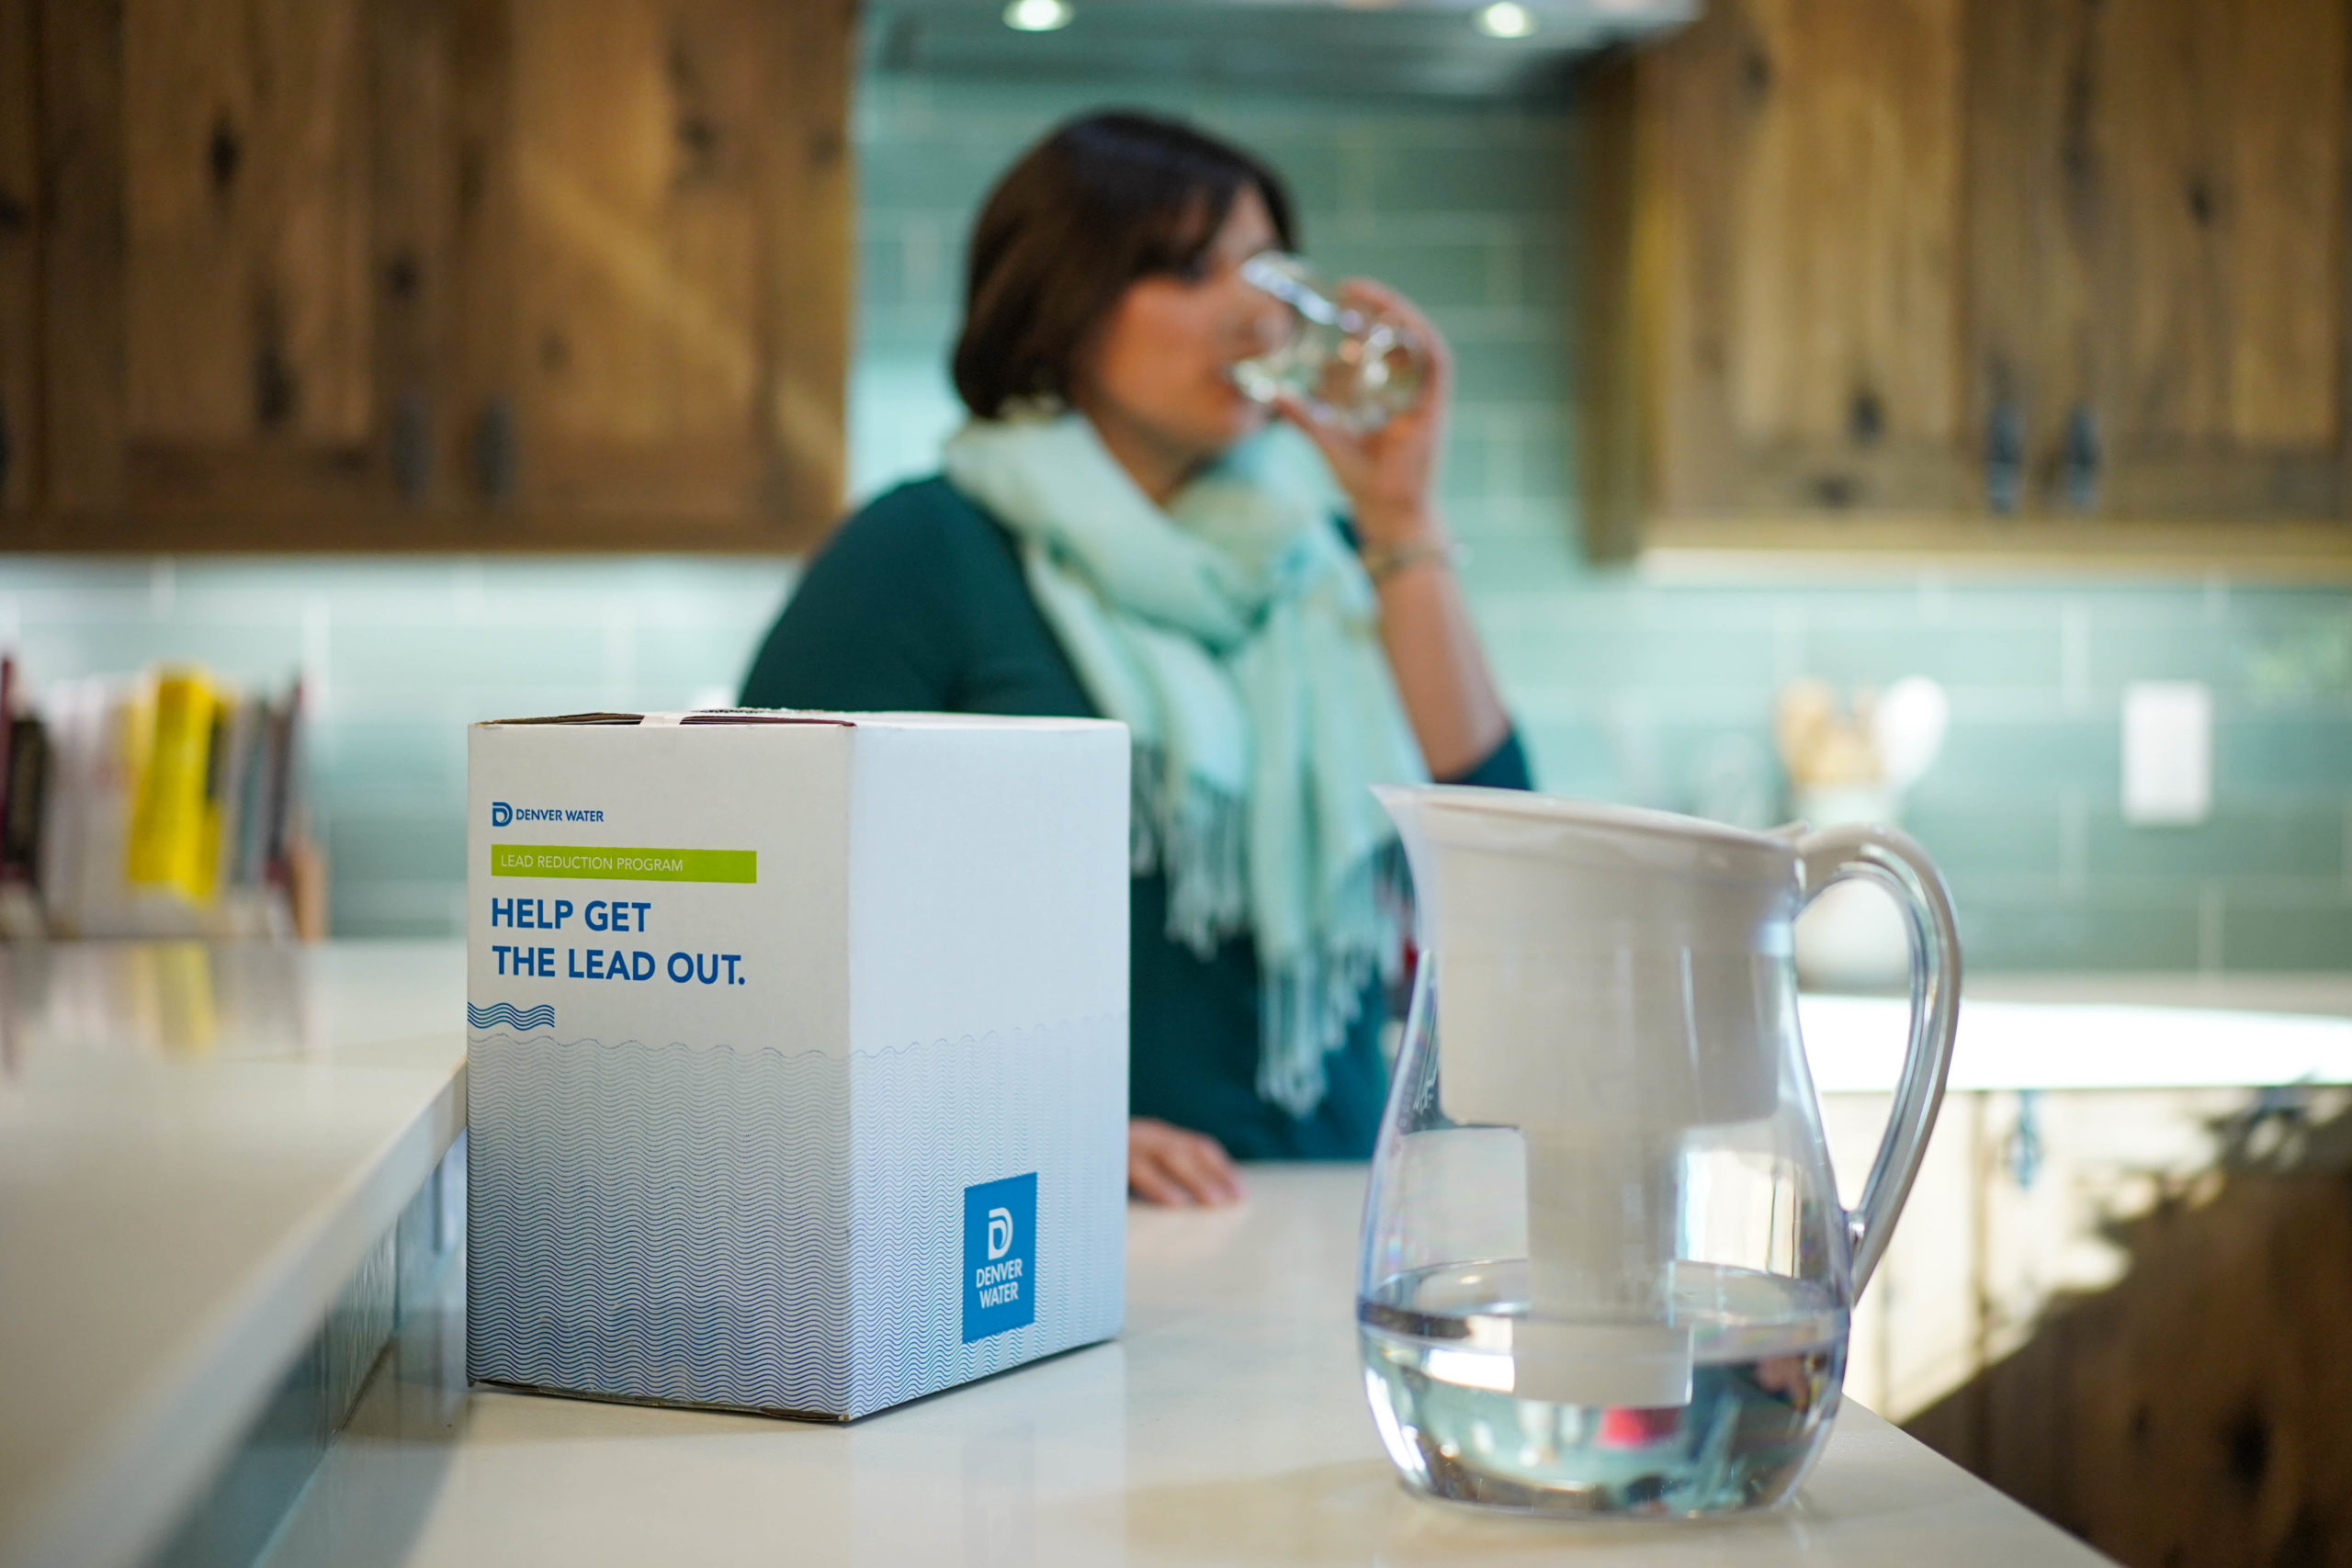 A woman drinks water from a glass, in the foreground is a box and water pitcher with a filter.